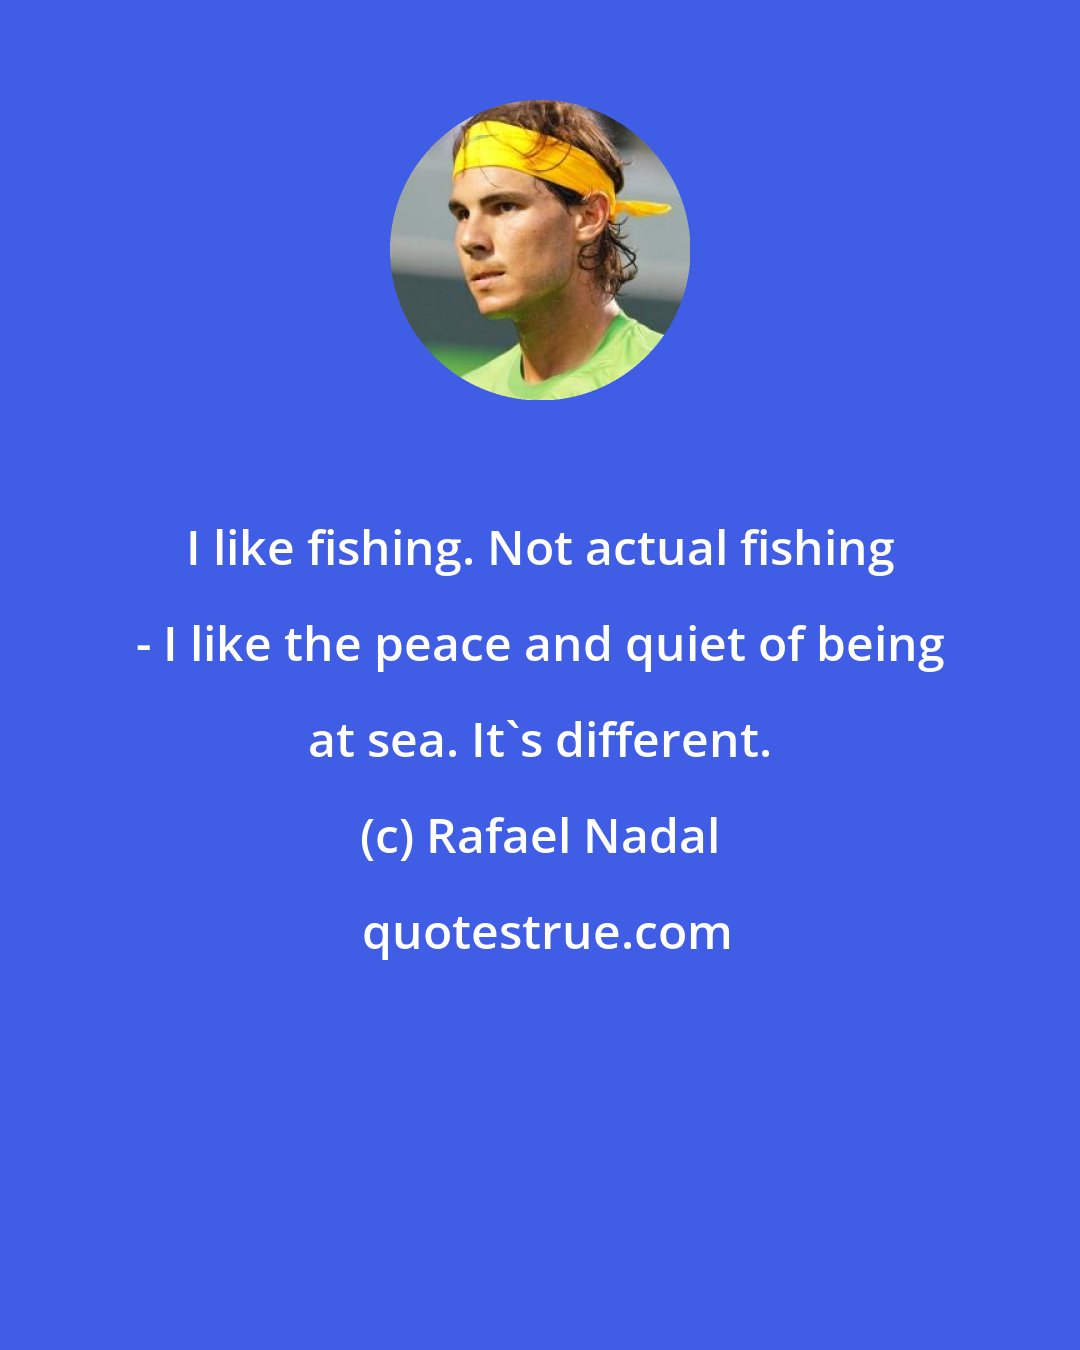 Rafael Nadal: I like fishing. Not actual fishing - I like the peace and quiet of being at sea. It's different.